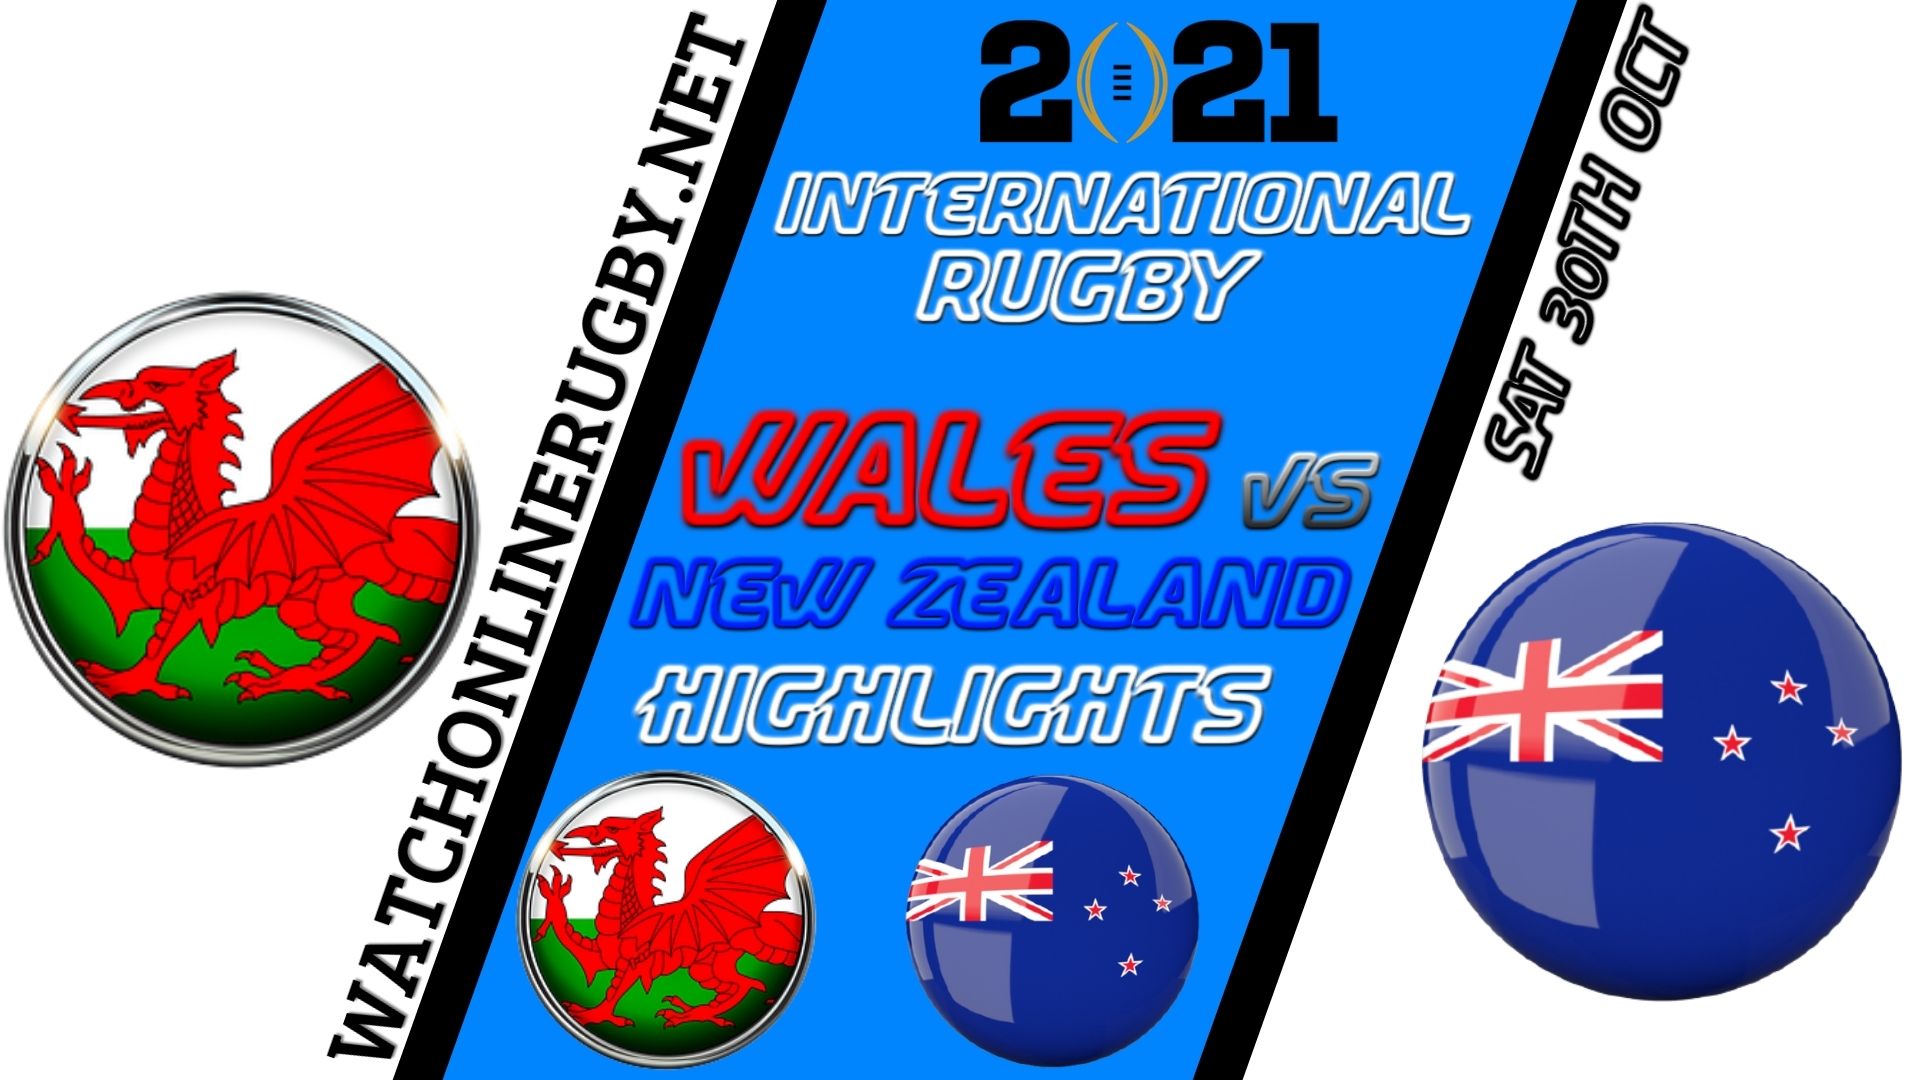 Wales Vs New Zealand United Rugby Championship 2021 RD 6